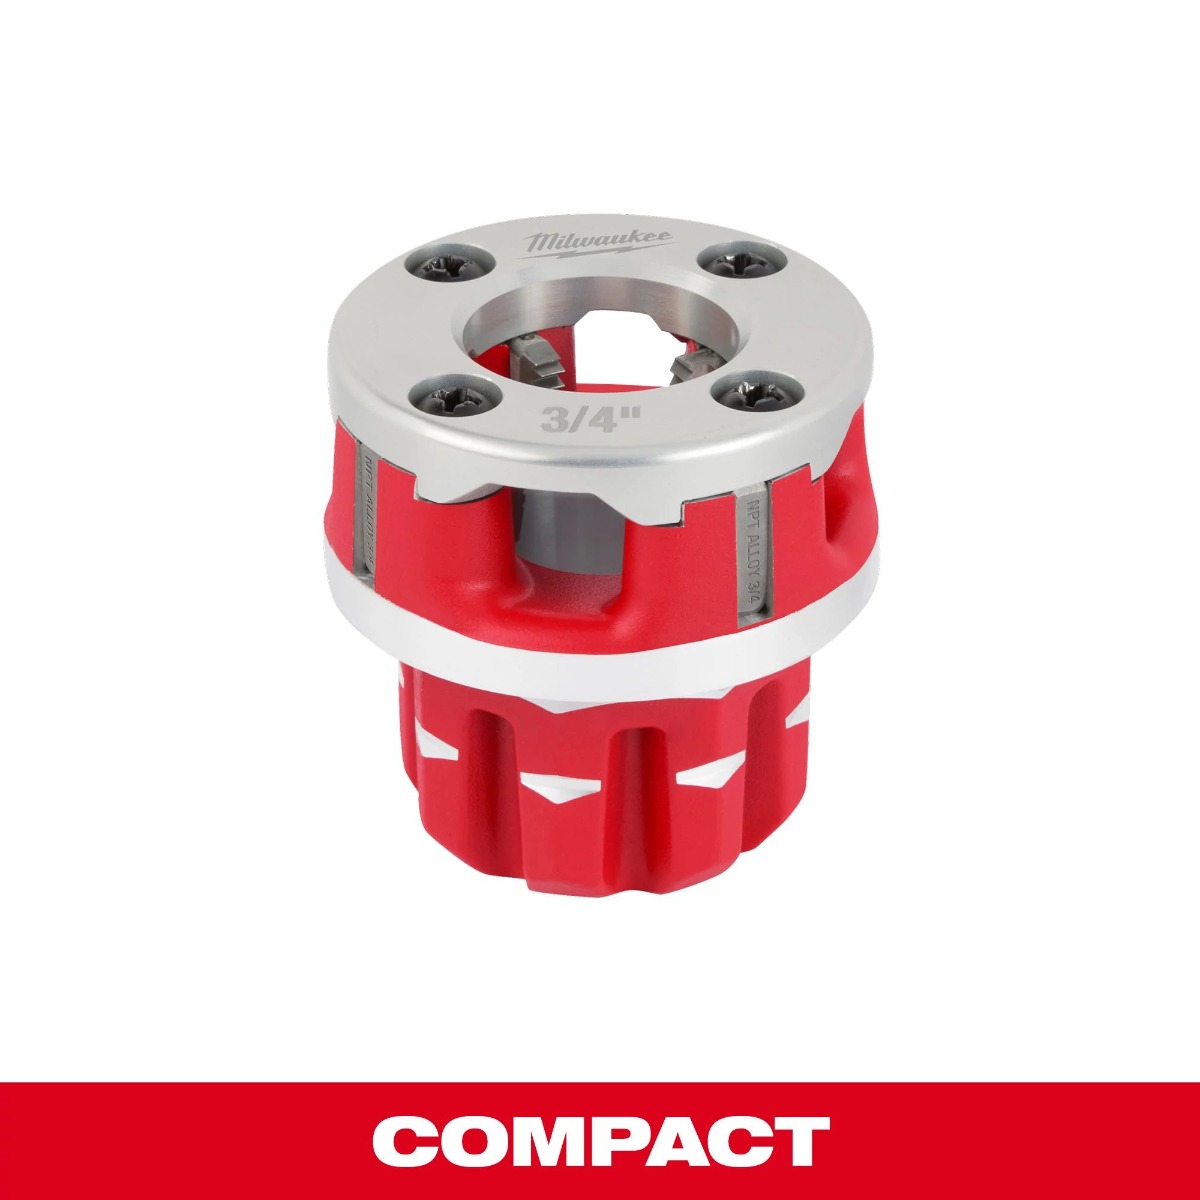 Milwaukee Compact 3/4" ALLOY NPT Portable Pipe Threading Forged Aluminum Die Head